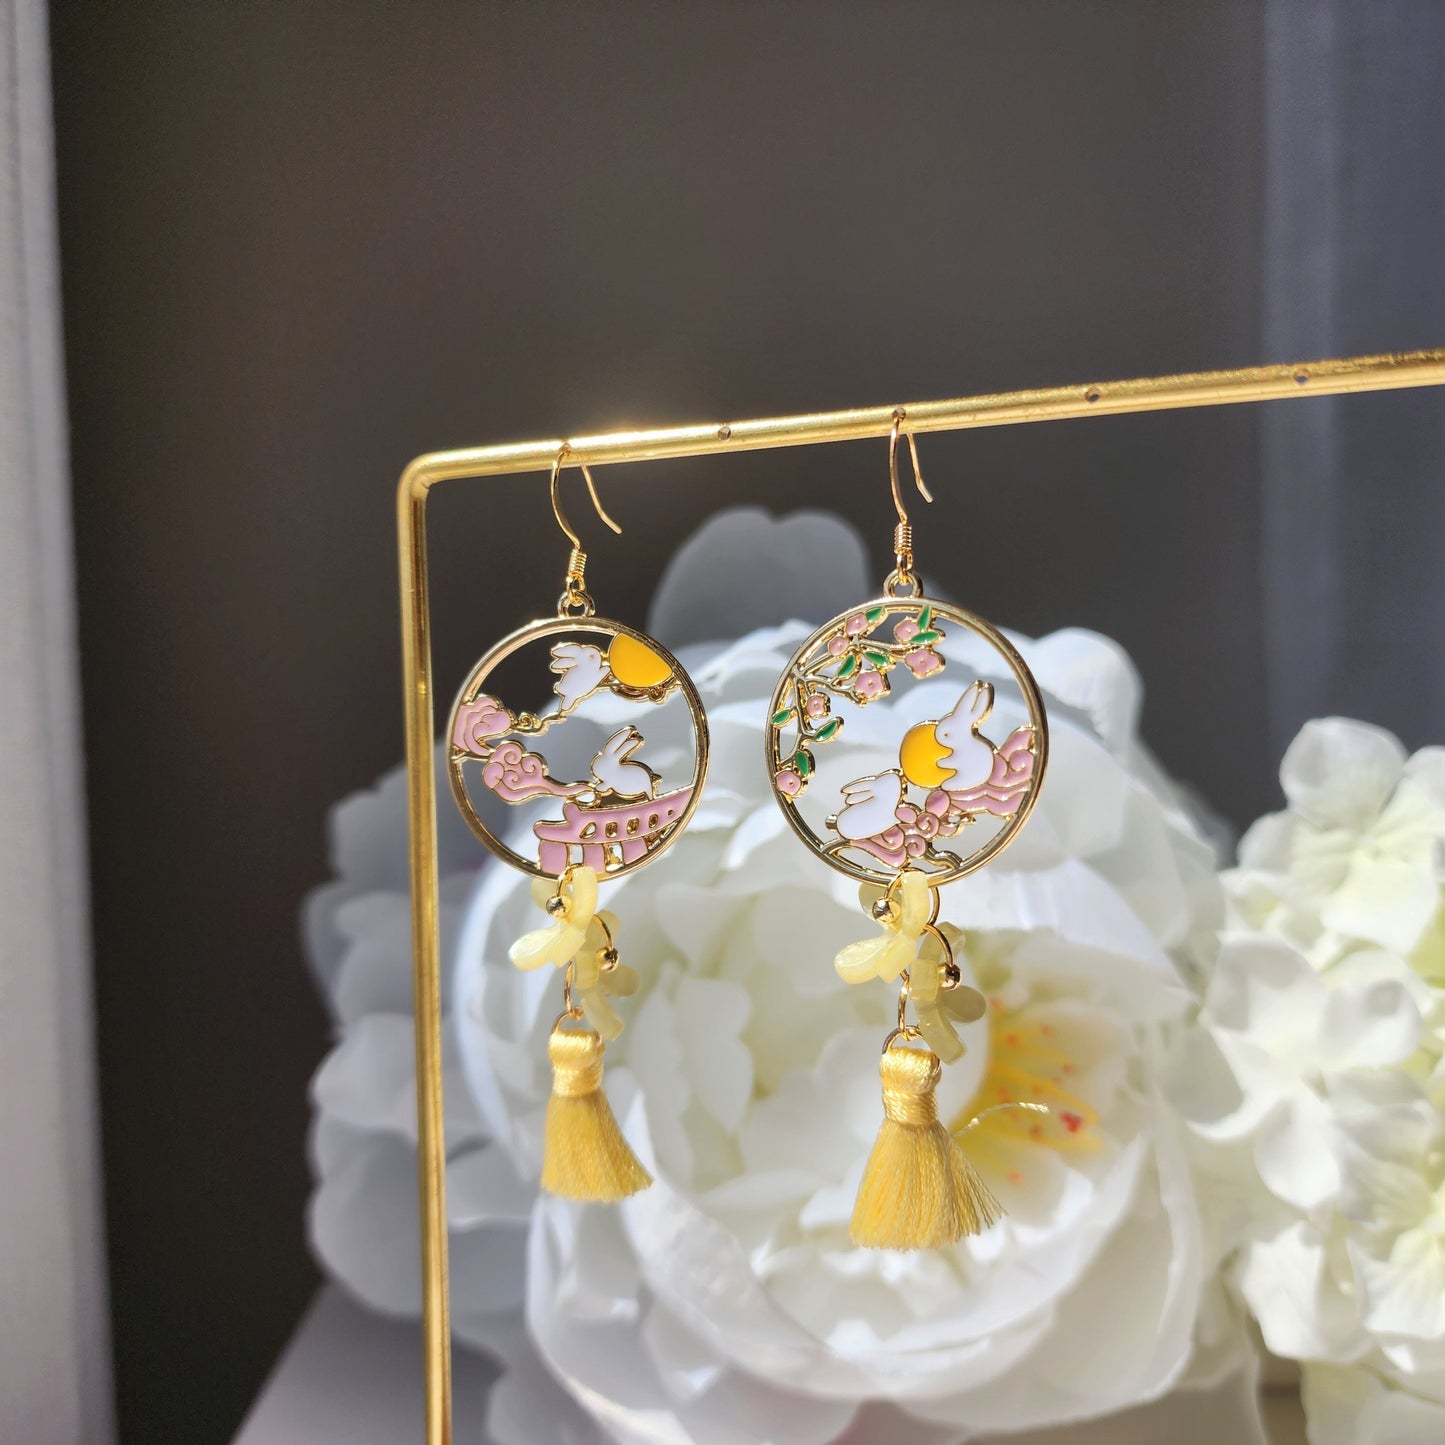 Yellow Osmanthus earrings, Japanese osmanthus blossom with rabbit bunny earrings, animal and floral earrings, gift for her